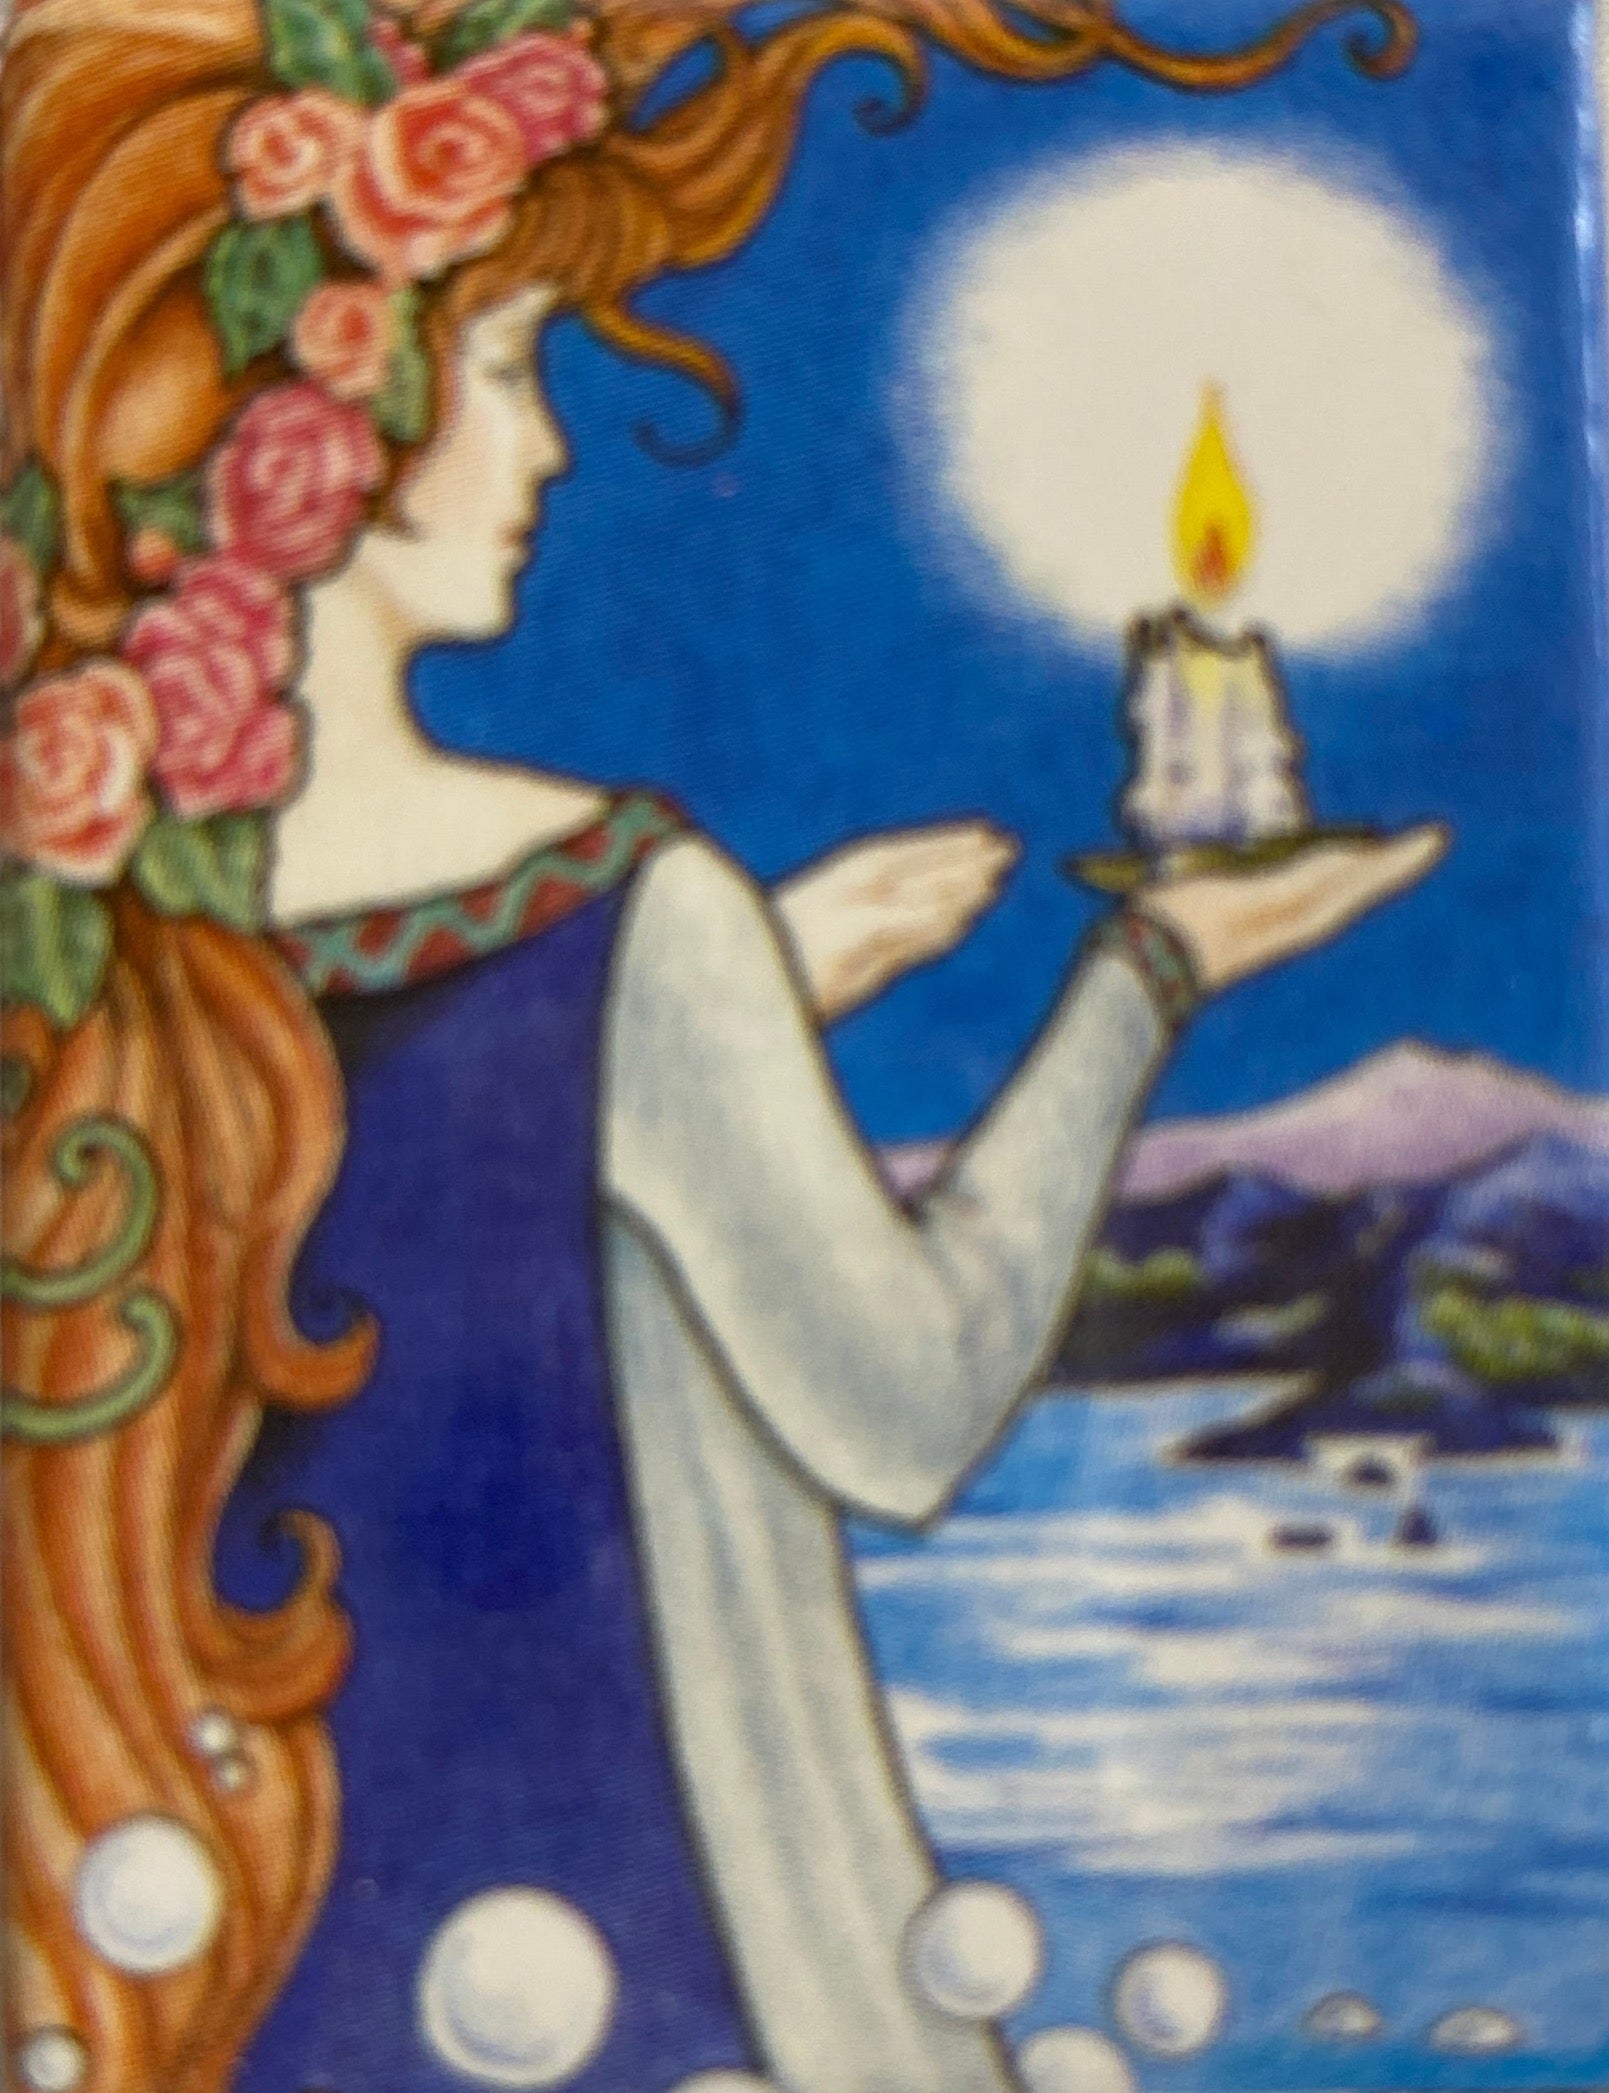 back of deck shows woman holding a candle overlooking ocean 